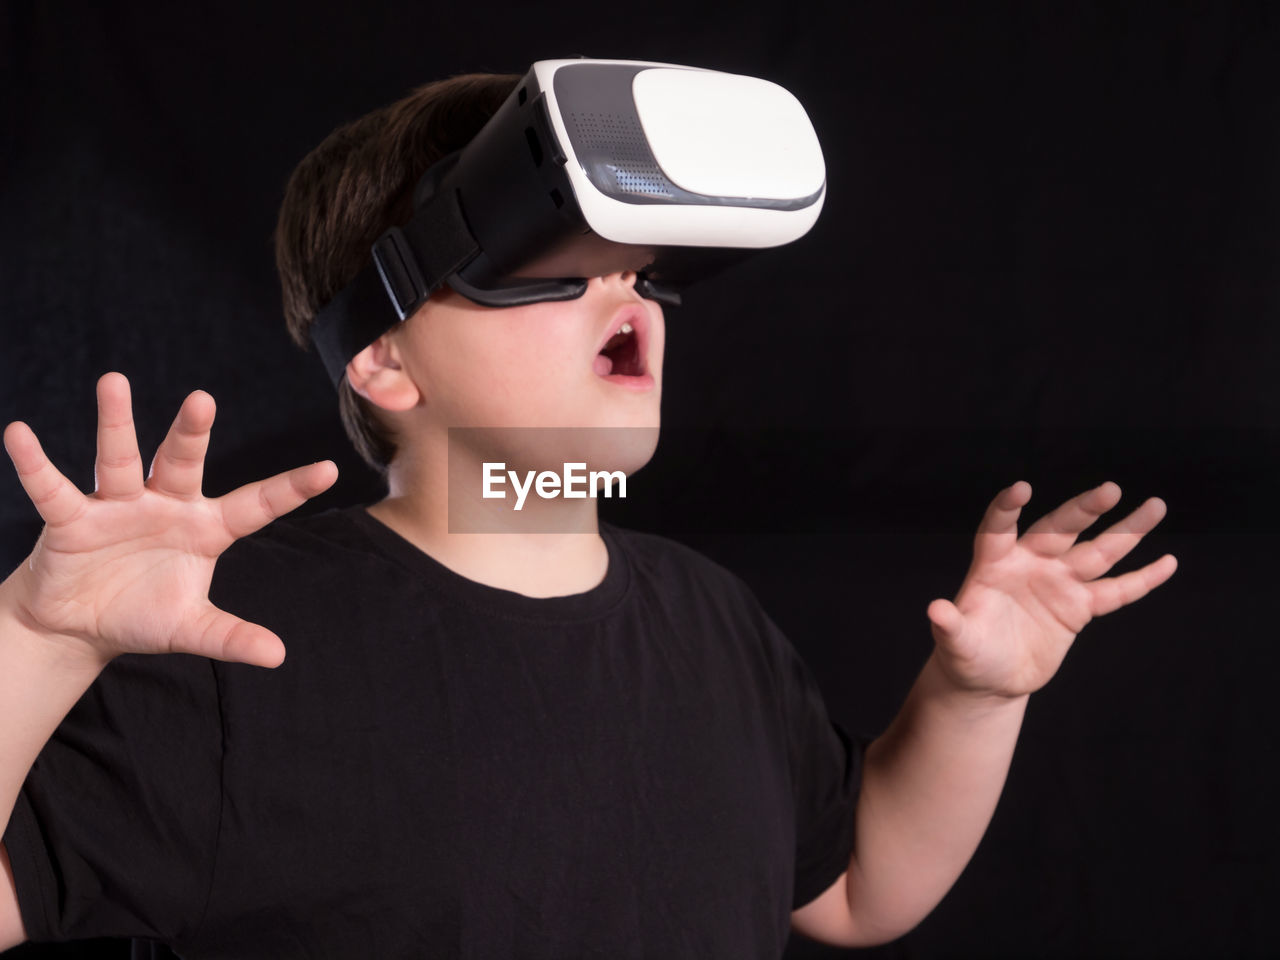 Boy gesturing while wearing virtual reality simulator against black background